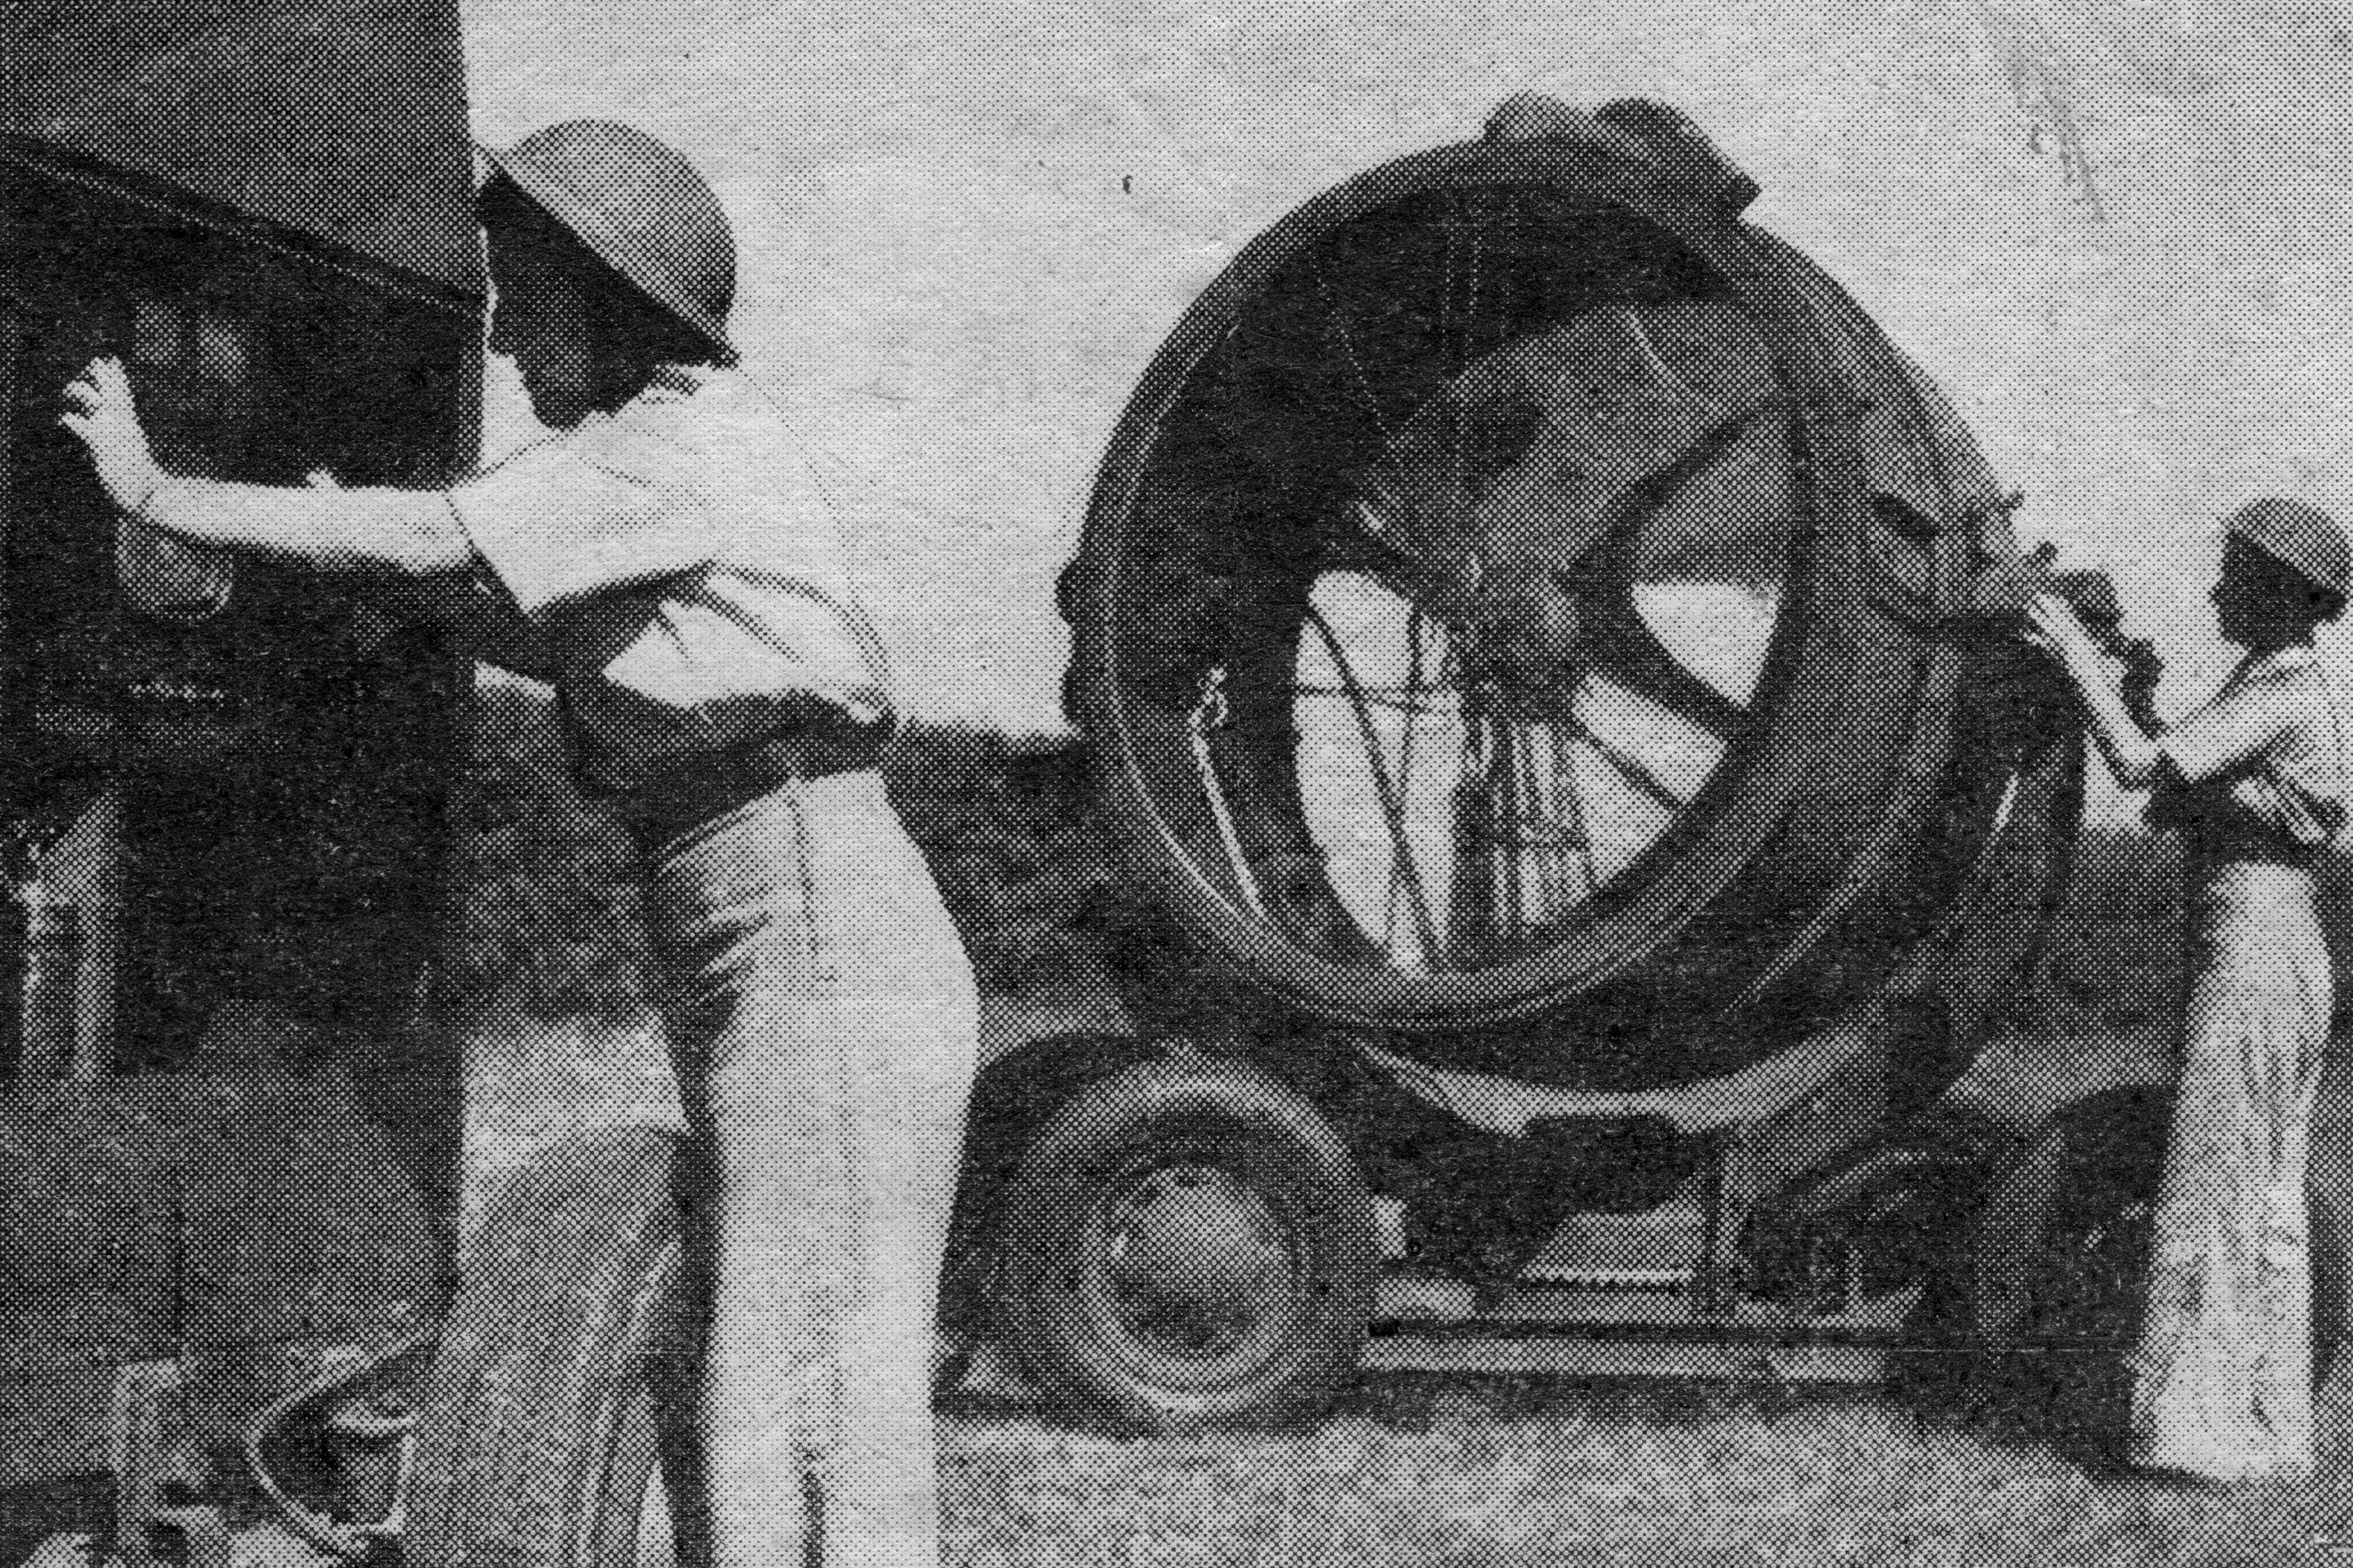 Beatrice Mary Clark manning a searchlight in Cairo during the war. She was serving with the South African WAAFS at that time